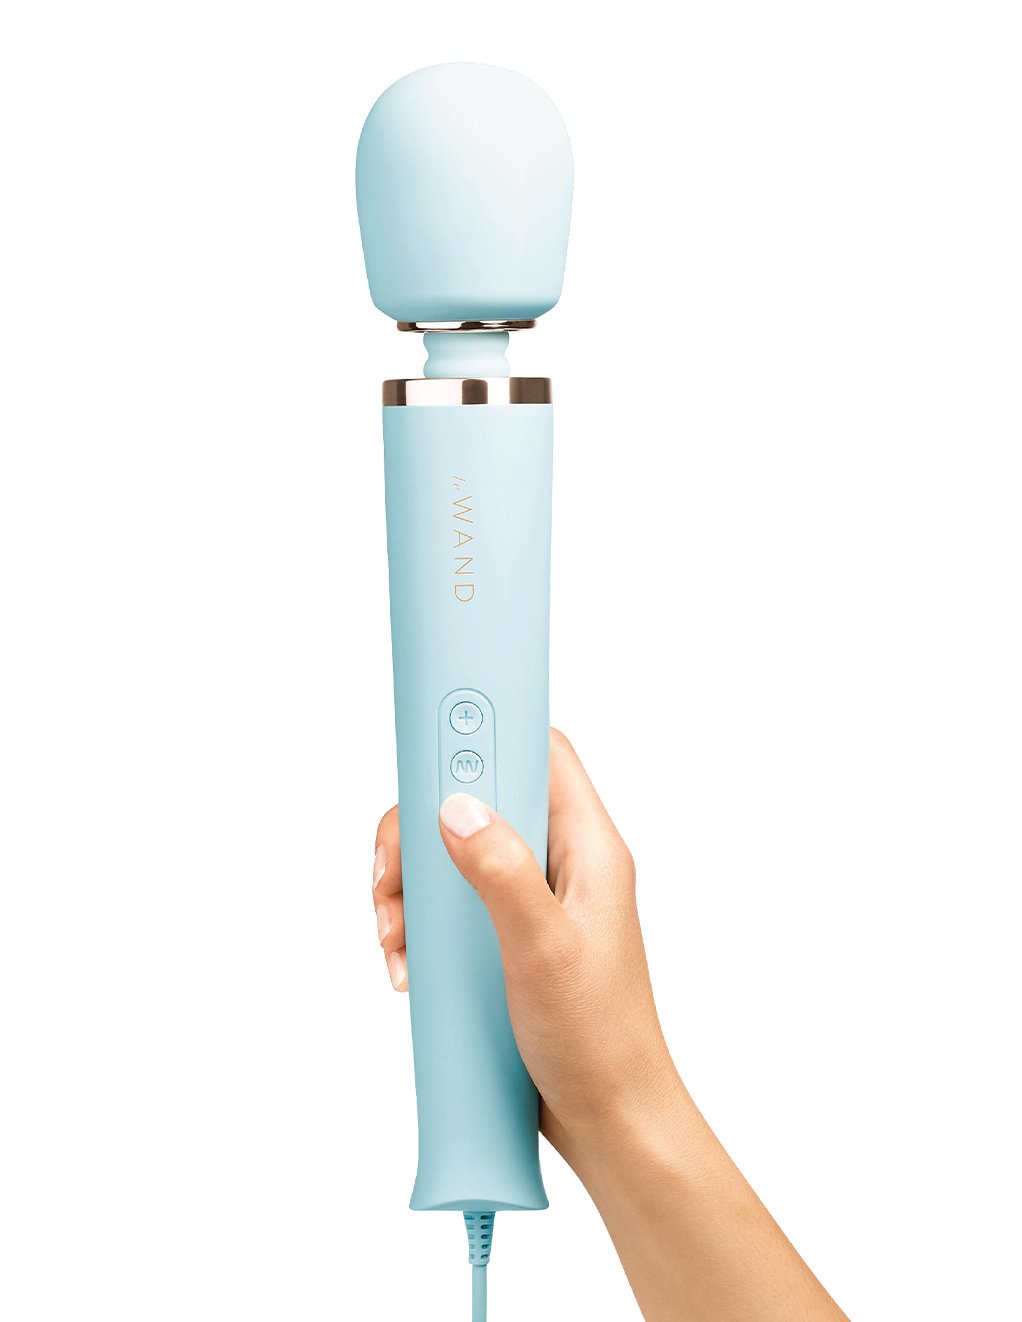 Le Wand Plug-In Wand Massager